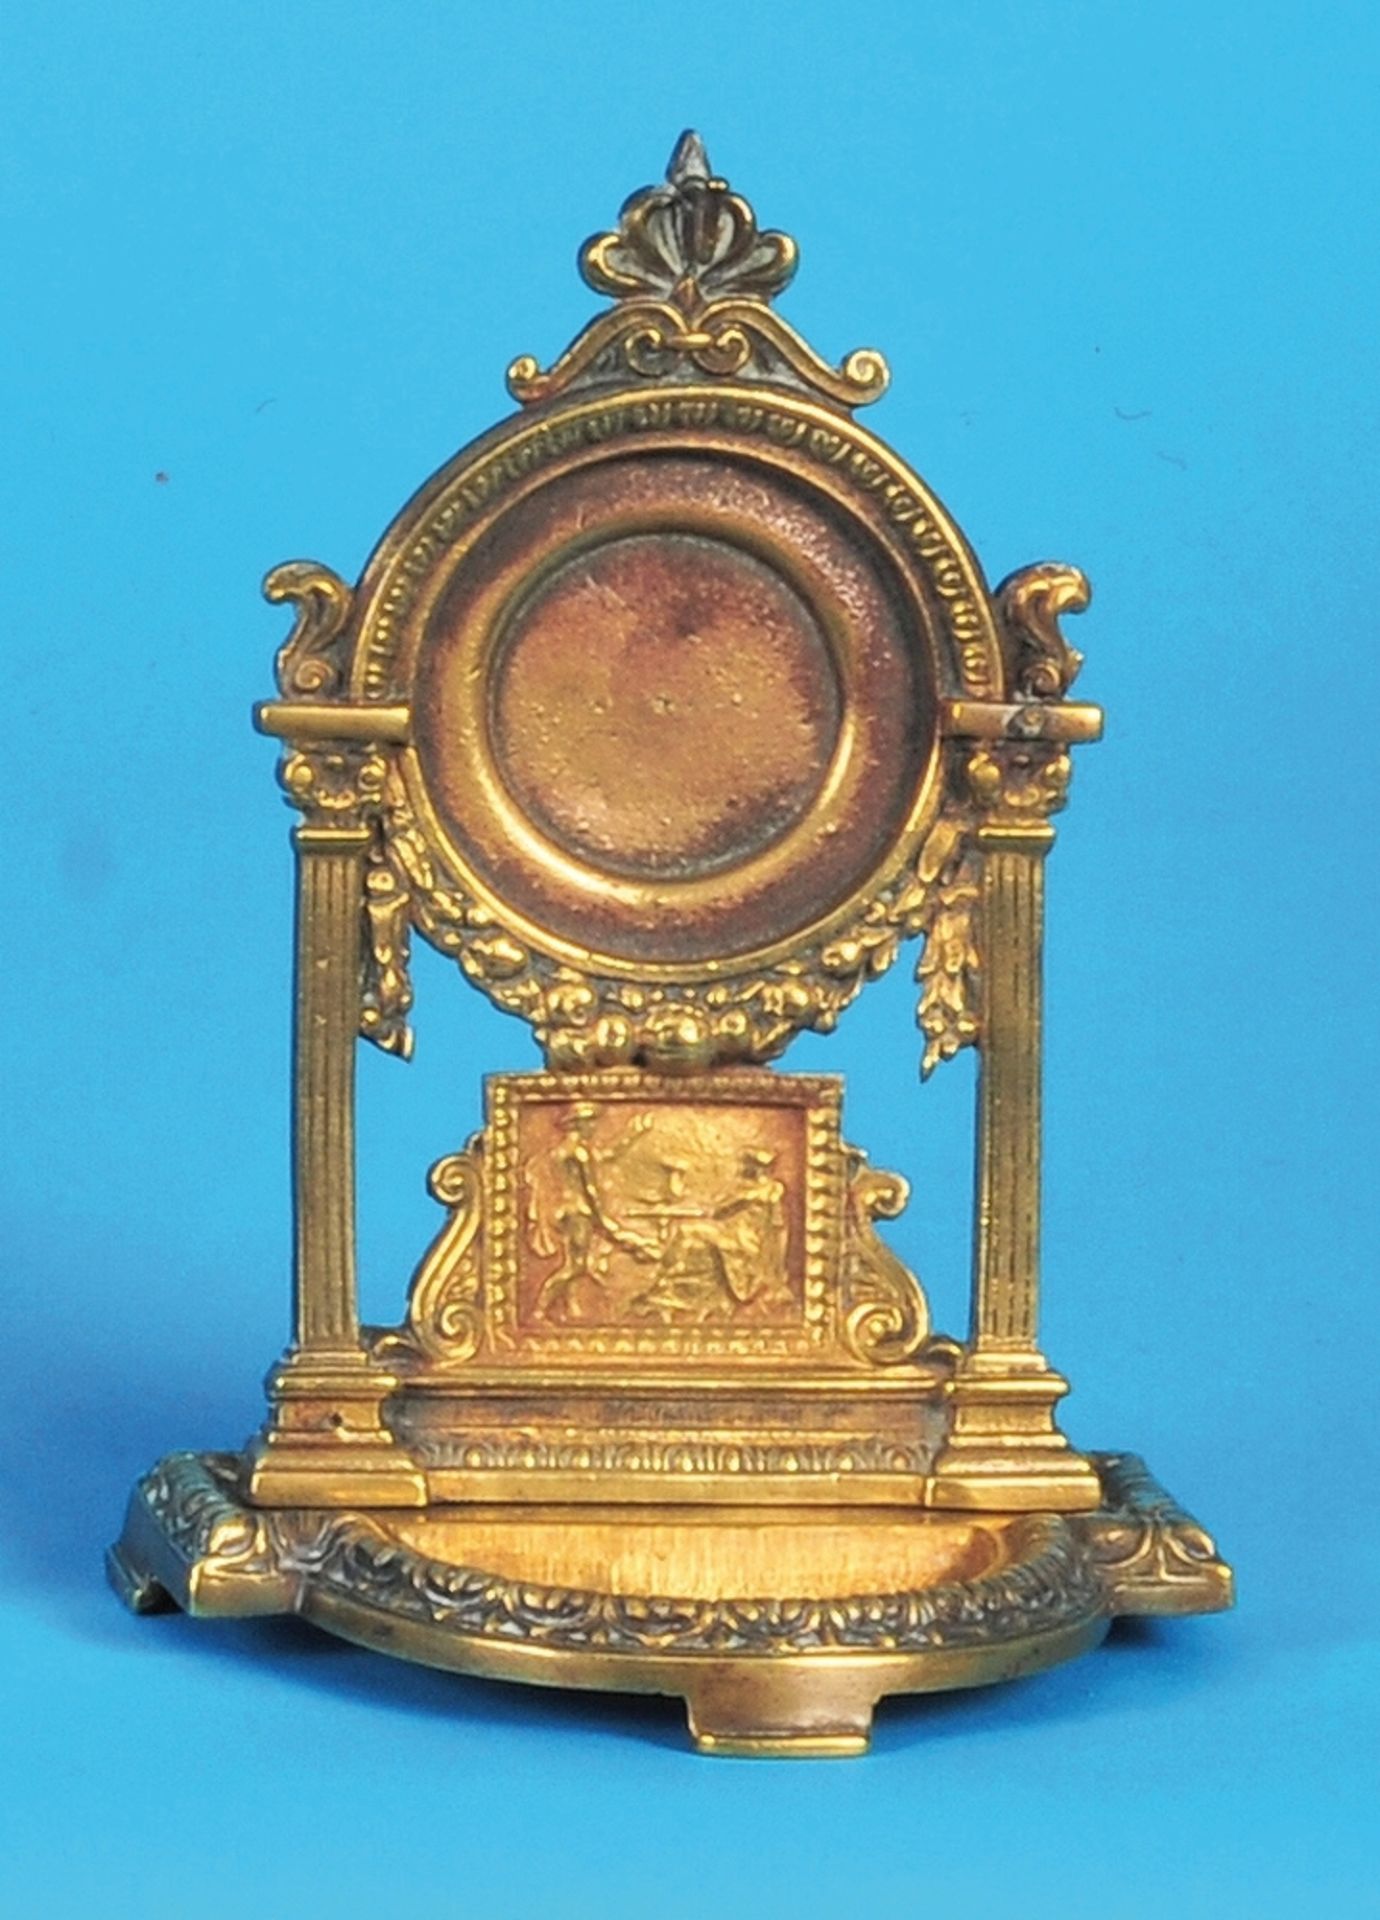 Small pocket watch stand, cast iron version
with relief image and 2 columns, Empire style, 